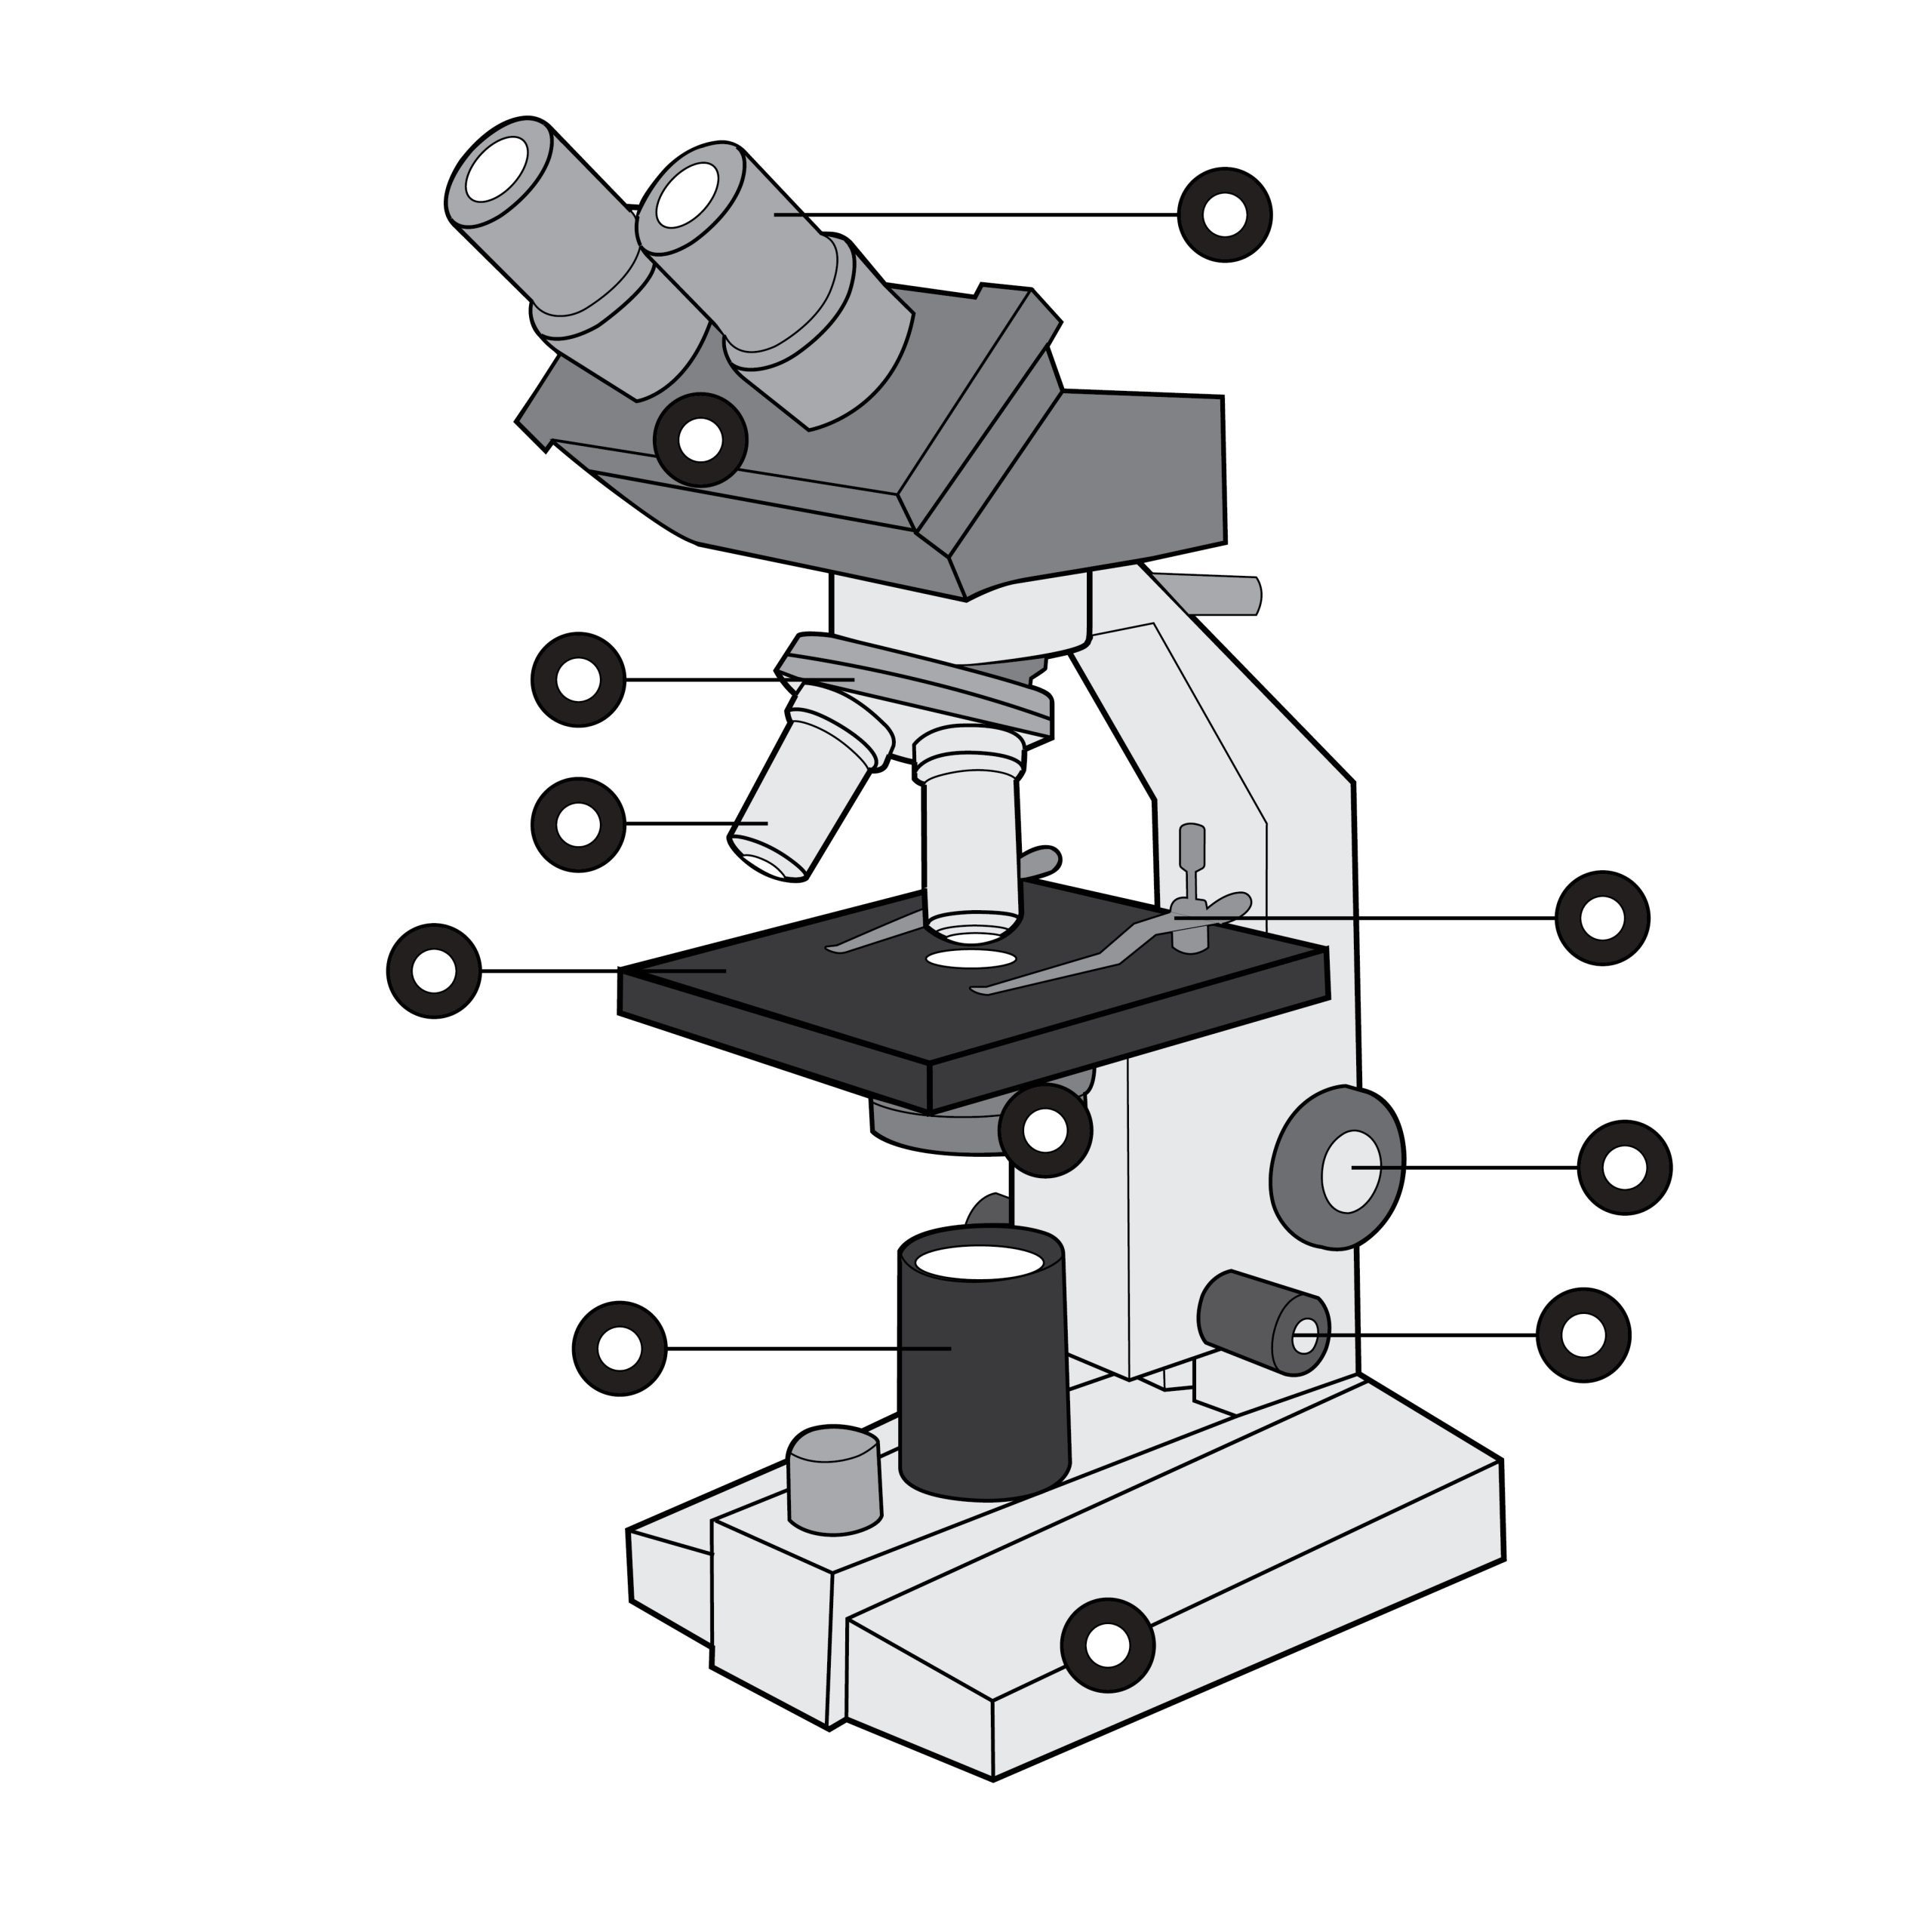 microscope parts labeled for kids